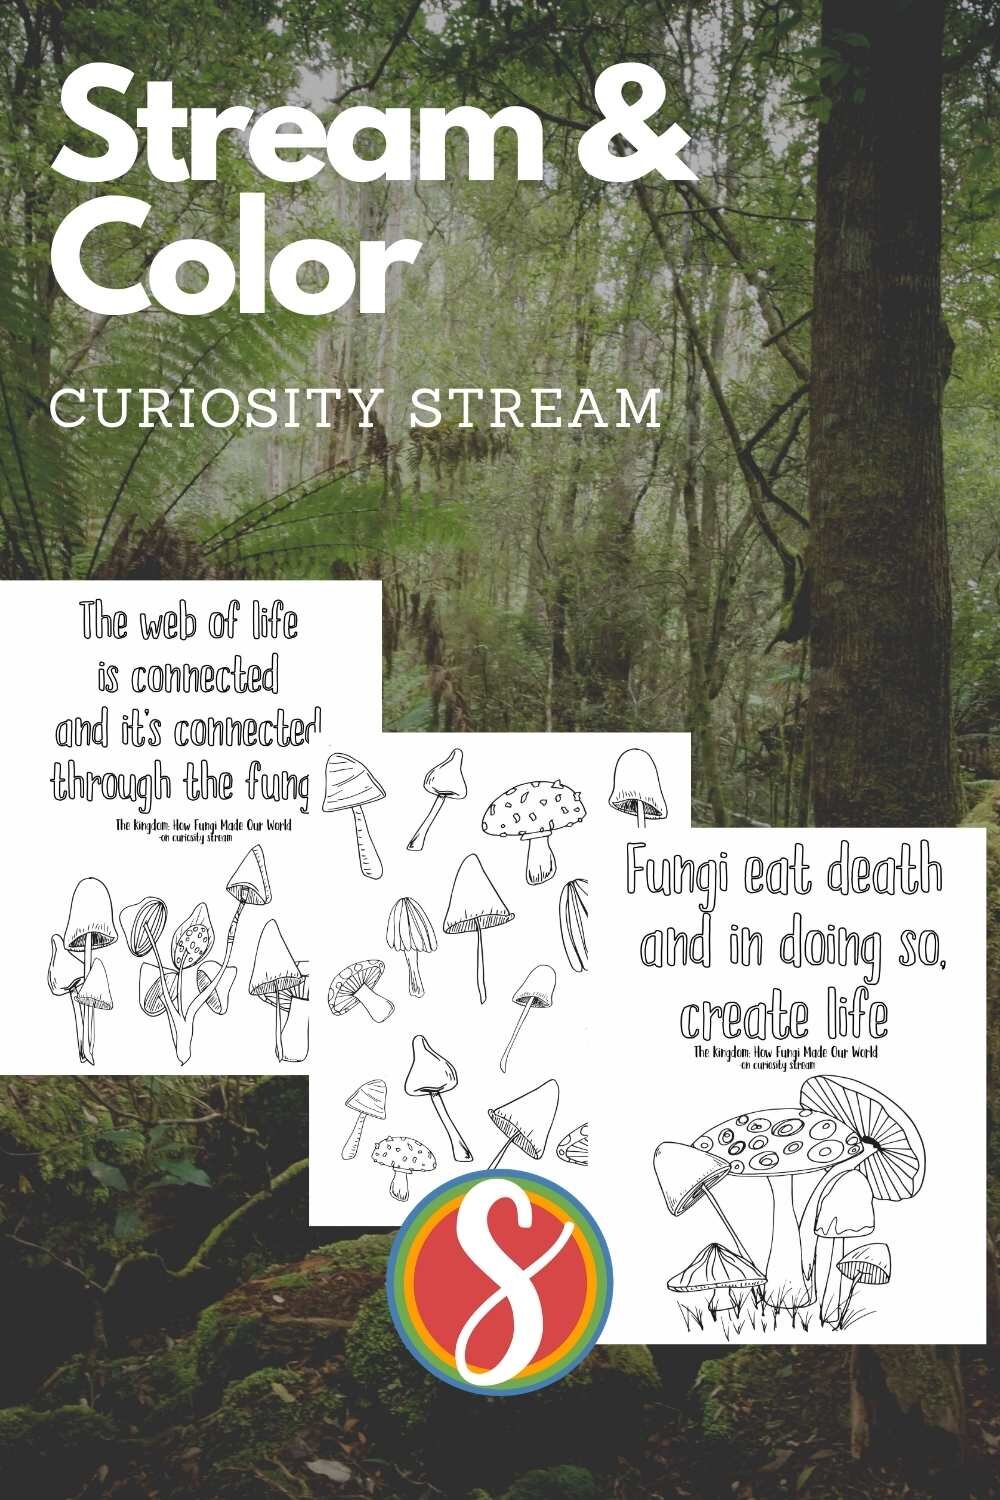 Watch The Kingdom: How Fungi Rule The World on Curiosity Stream and color these fun pages I made inspired by the show! The pages are totally free to print and color - print them out for your whole class!